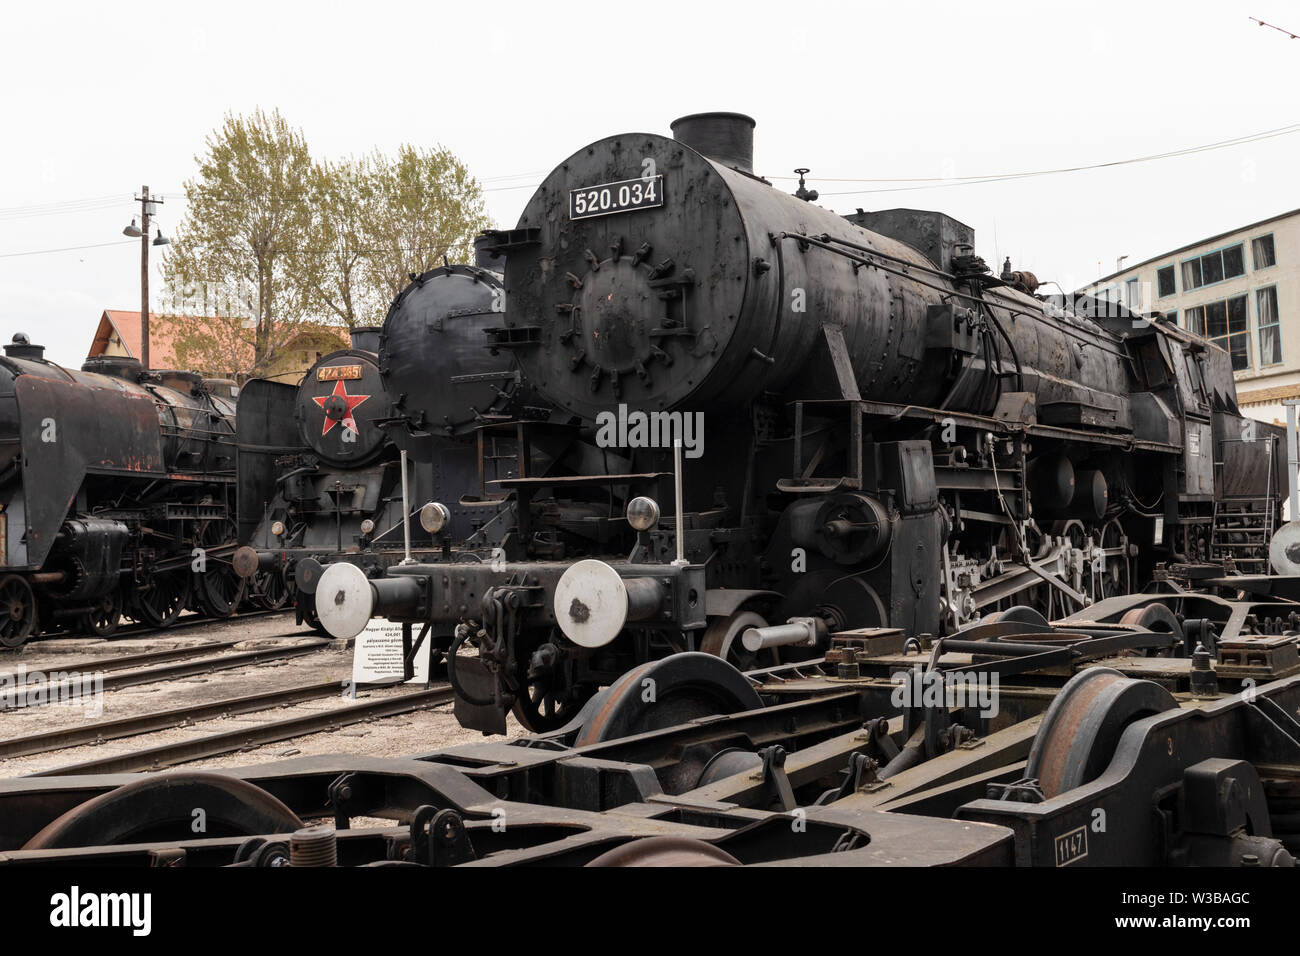 BUDAPEST, HUNGARY - April 05, 2019: Historic steam locomotive on display at the Hungarian Railway Museum. Undercarriage in foreground. Stock Photo